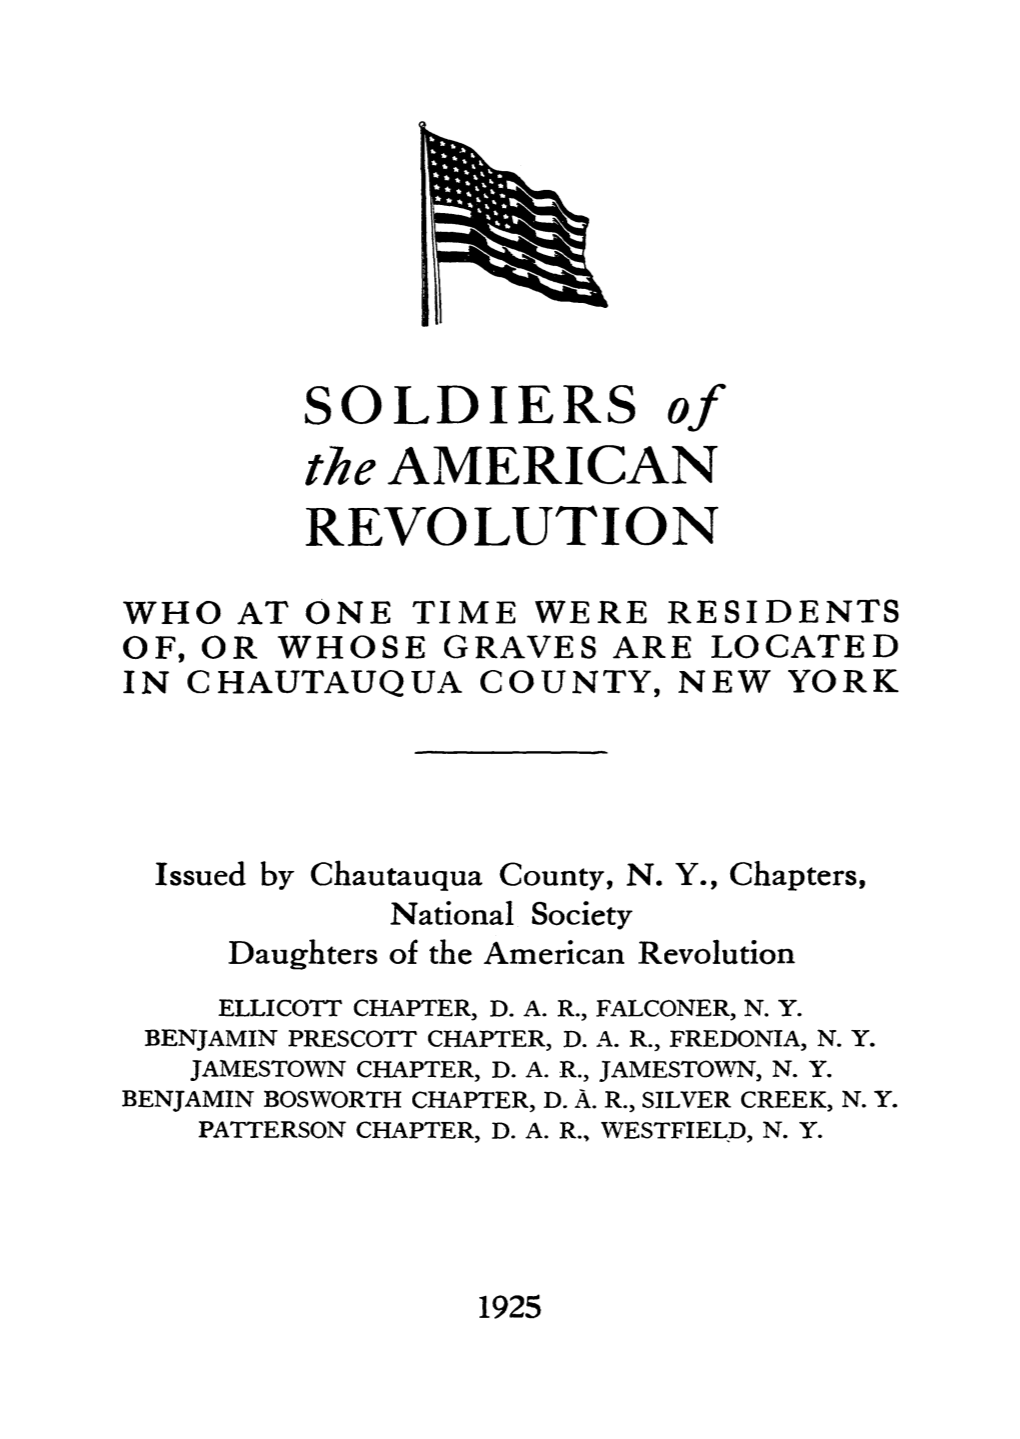 SOLDIERS of the AMERICAN REVOLUTION